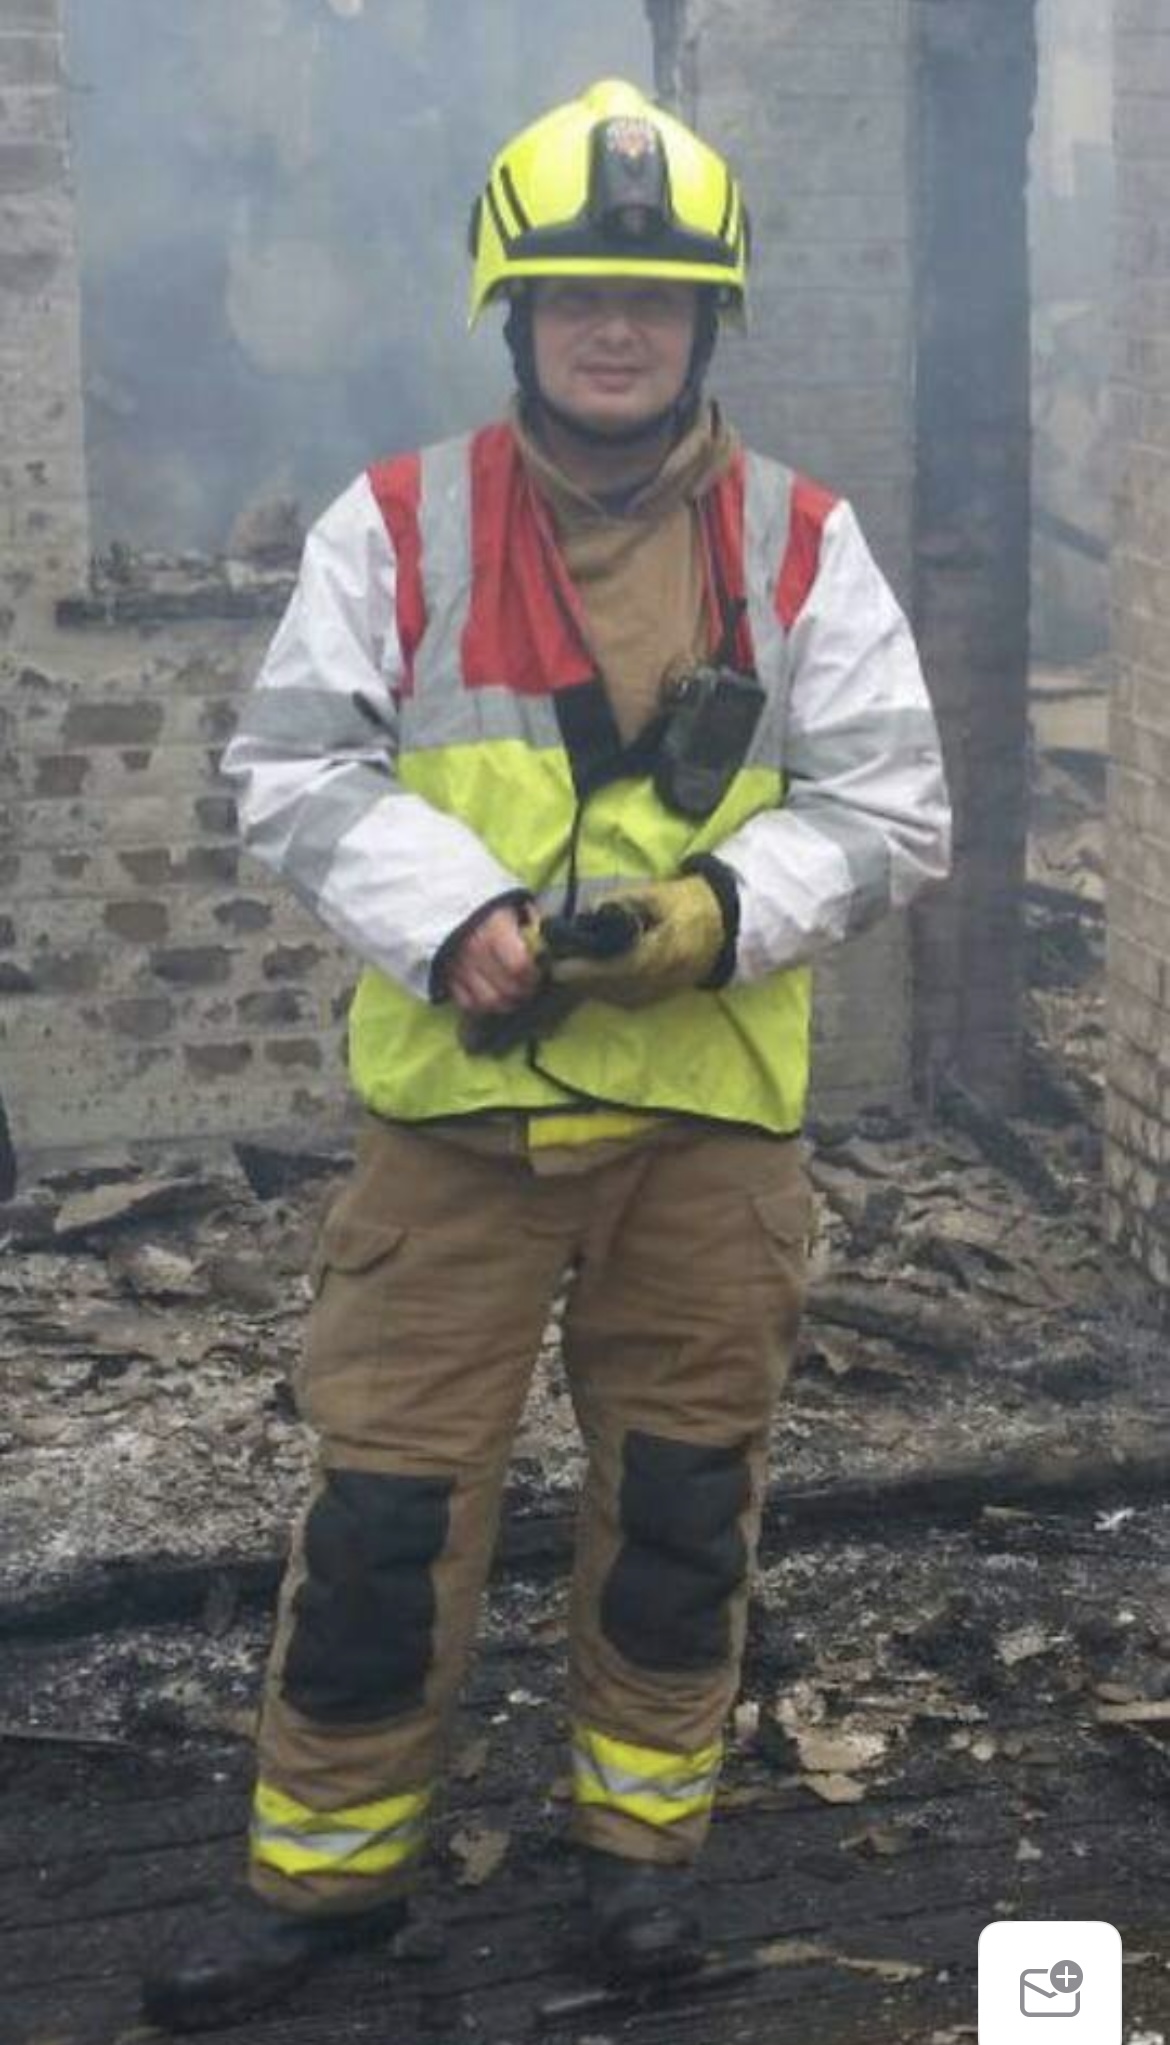 Harry wearing his firefighter uniform at the site of a fire